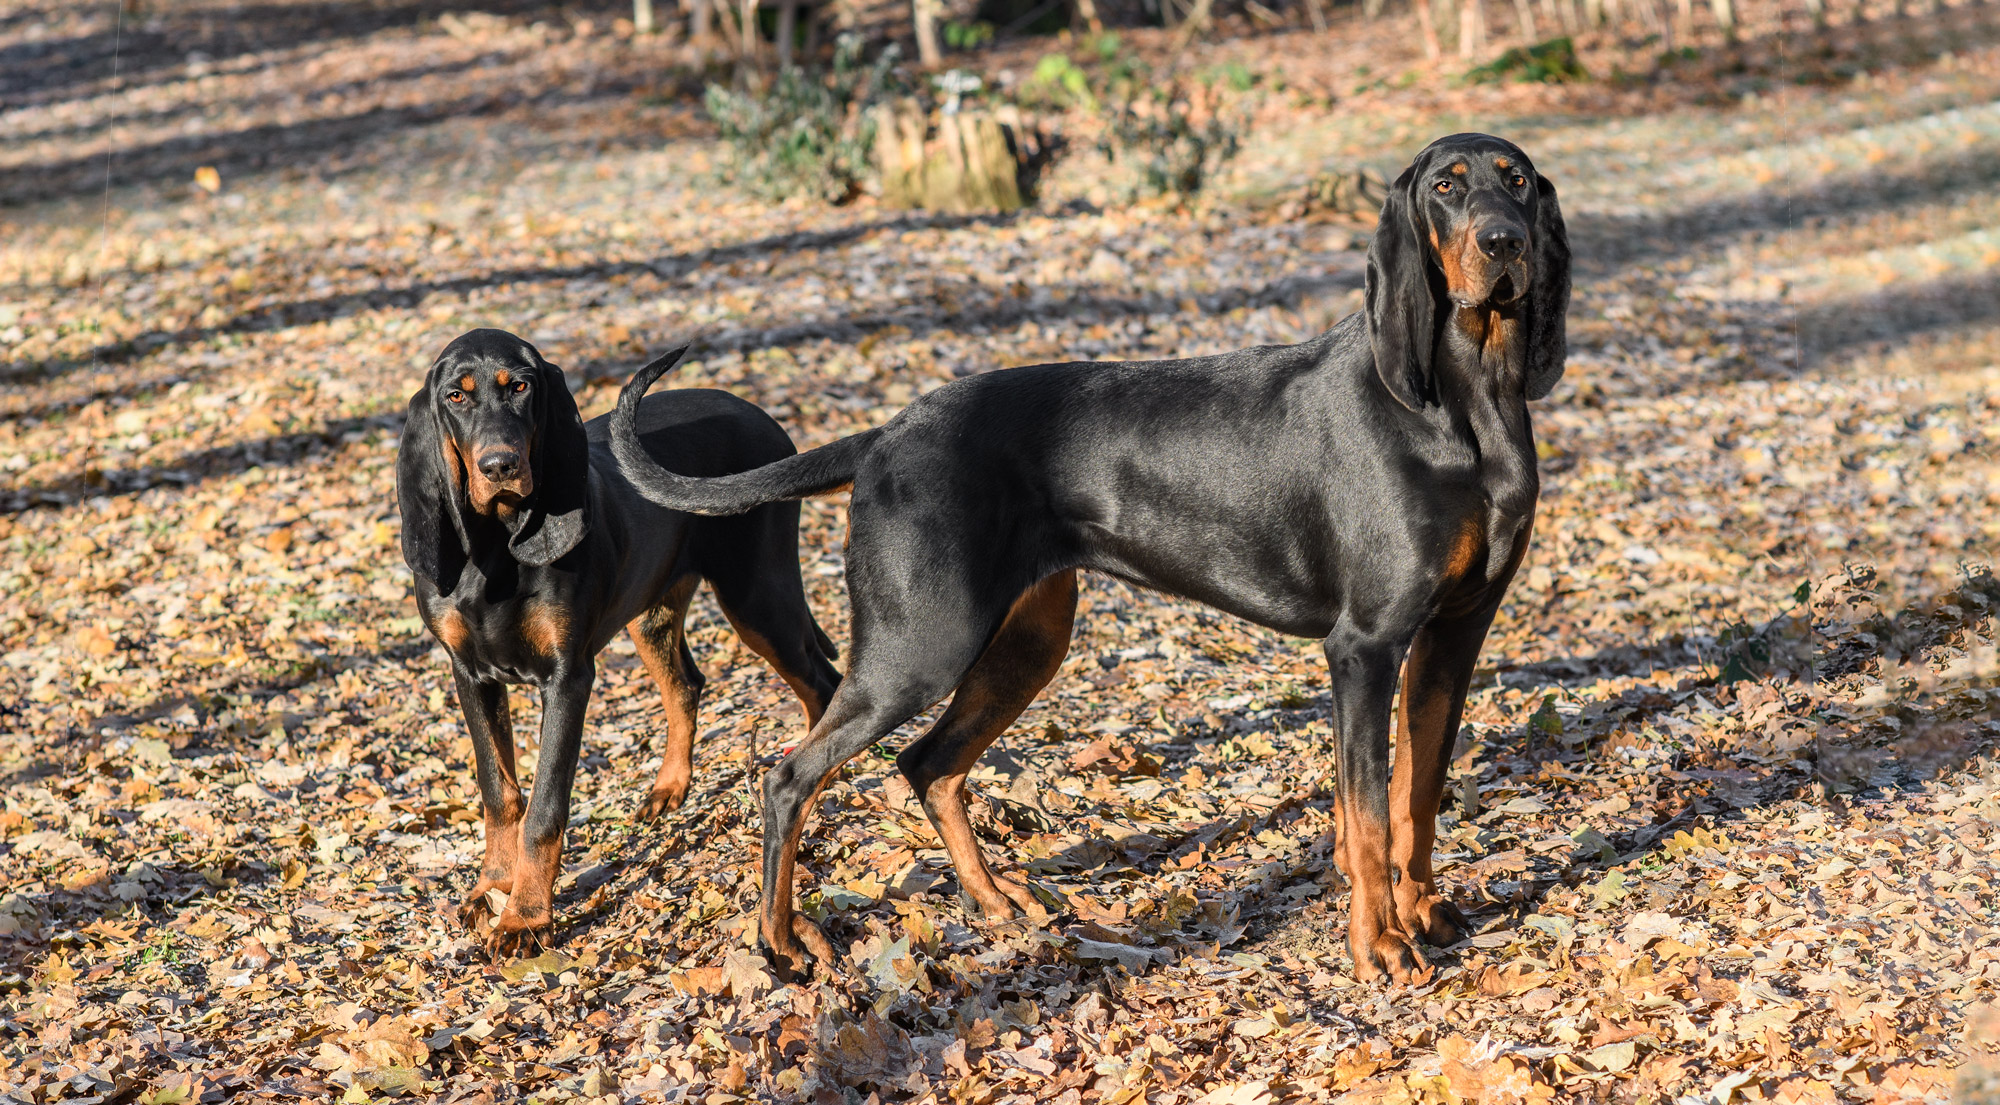 Black and Tan Coonhound - The breed 